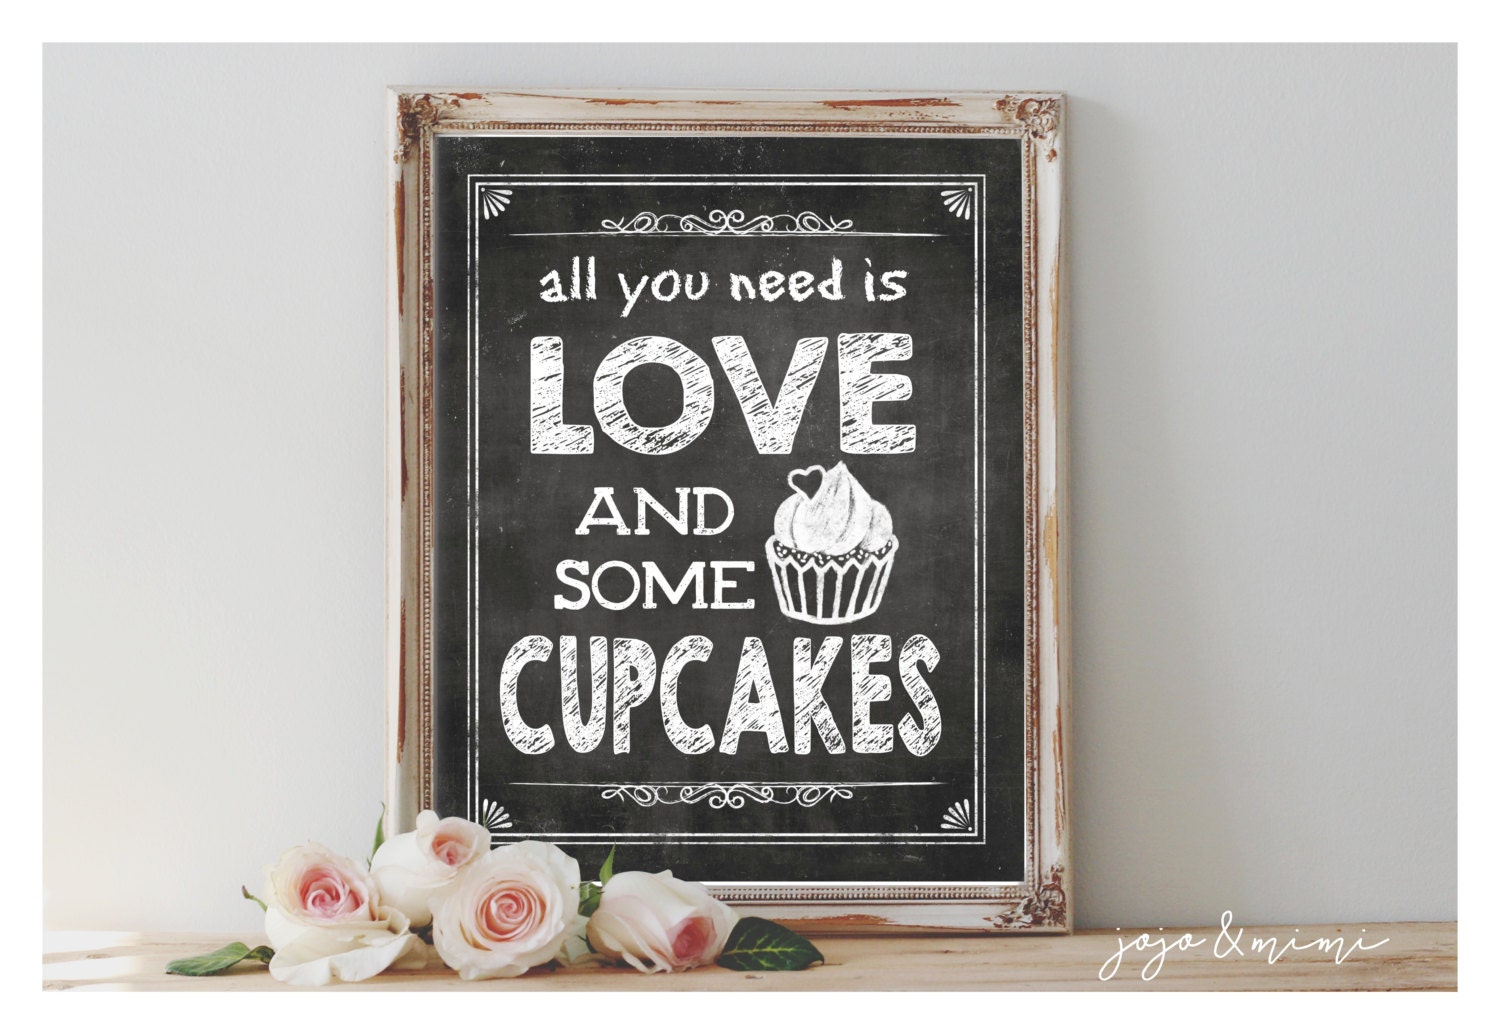 Download Instant 'all you need IS LOVE and some CUPCAKES'